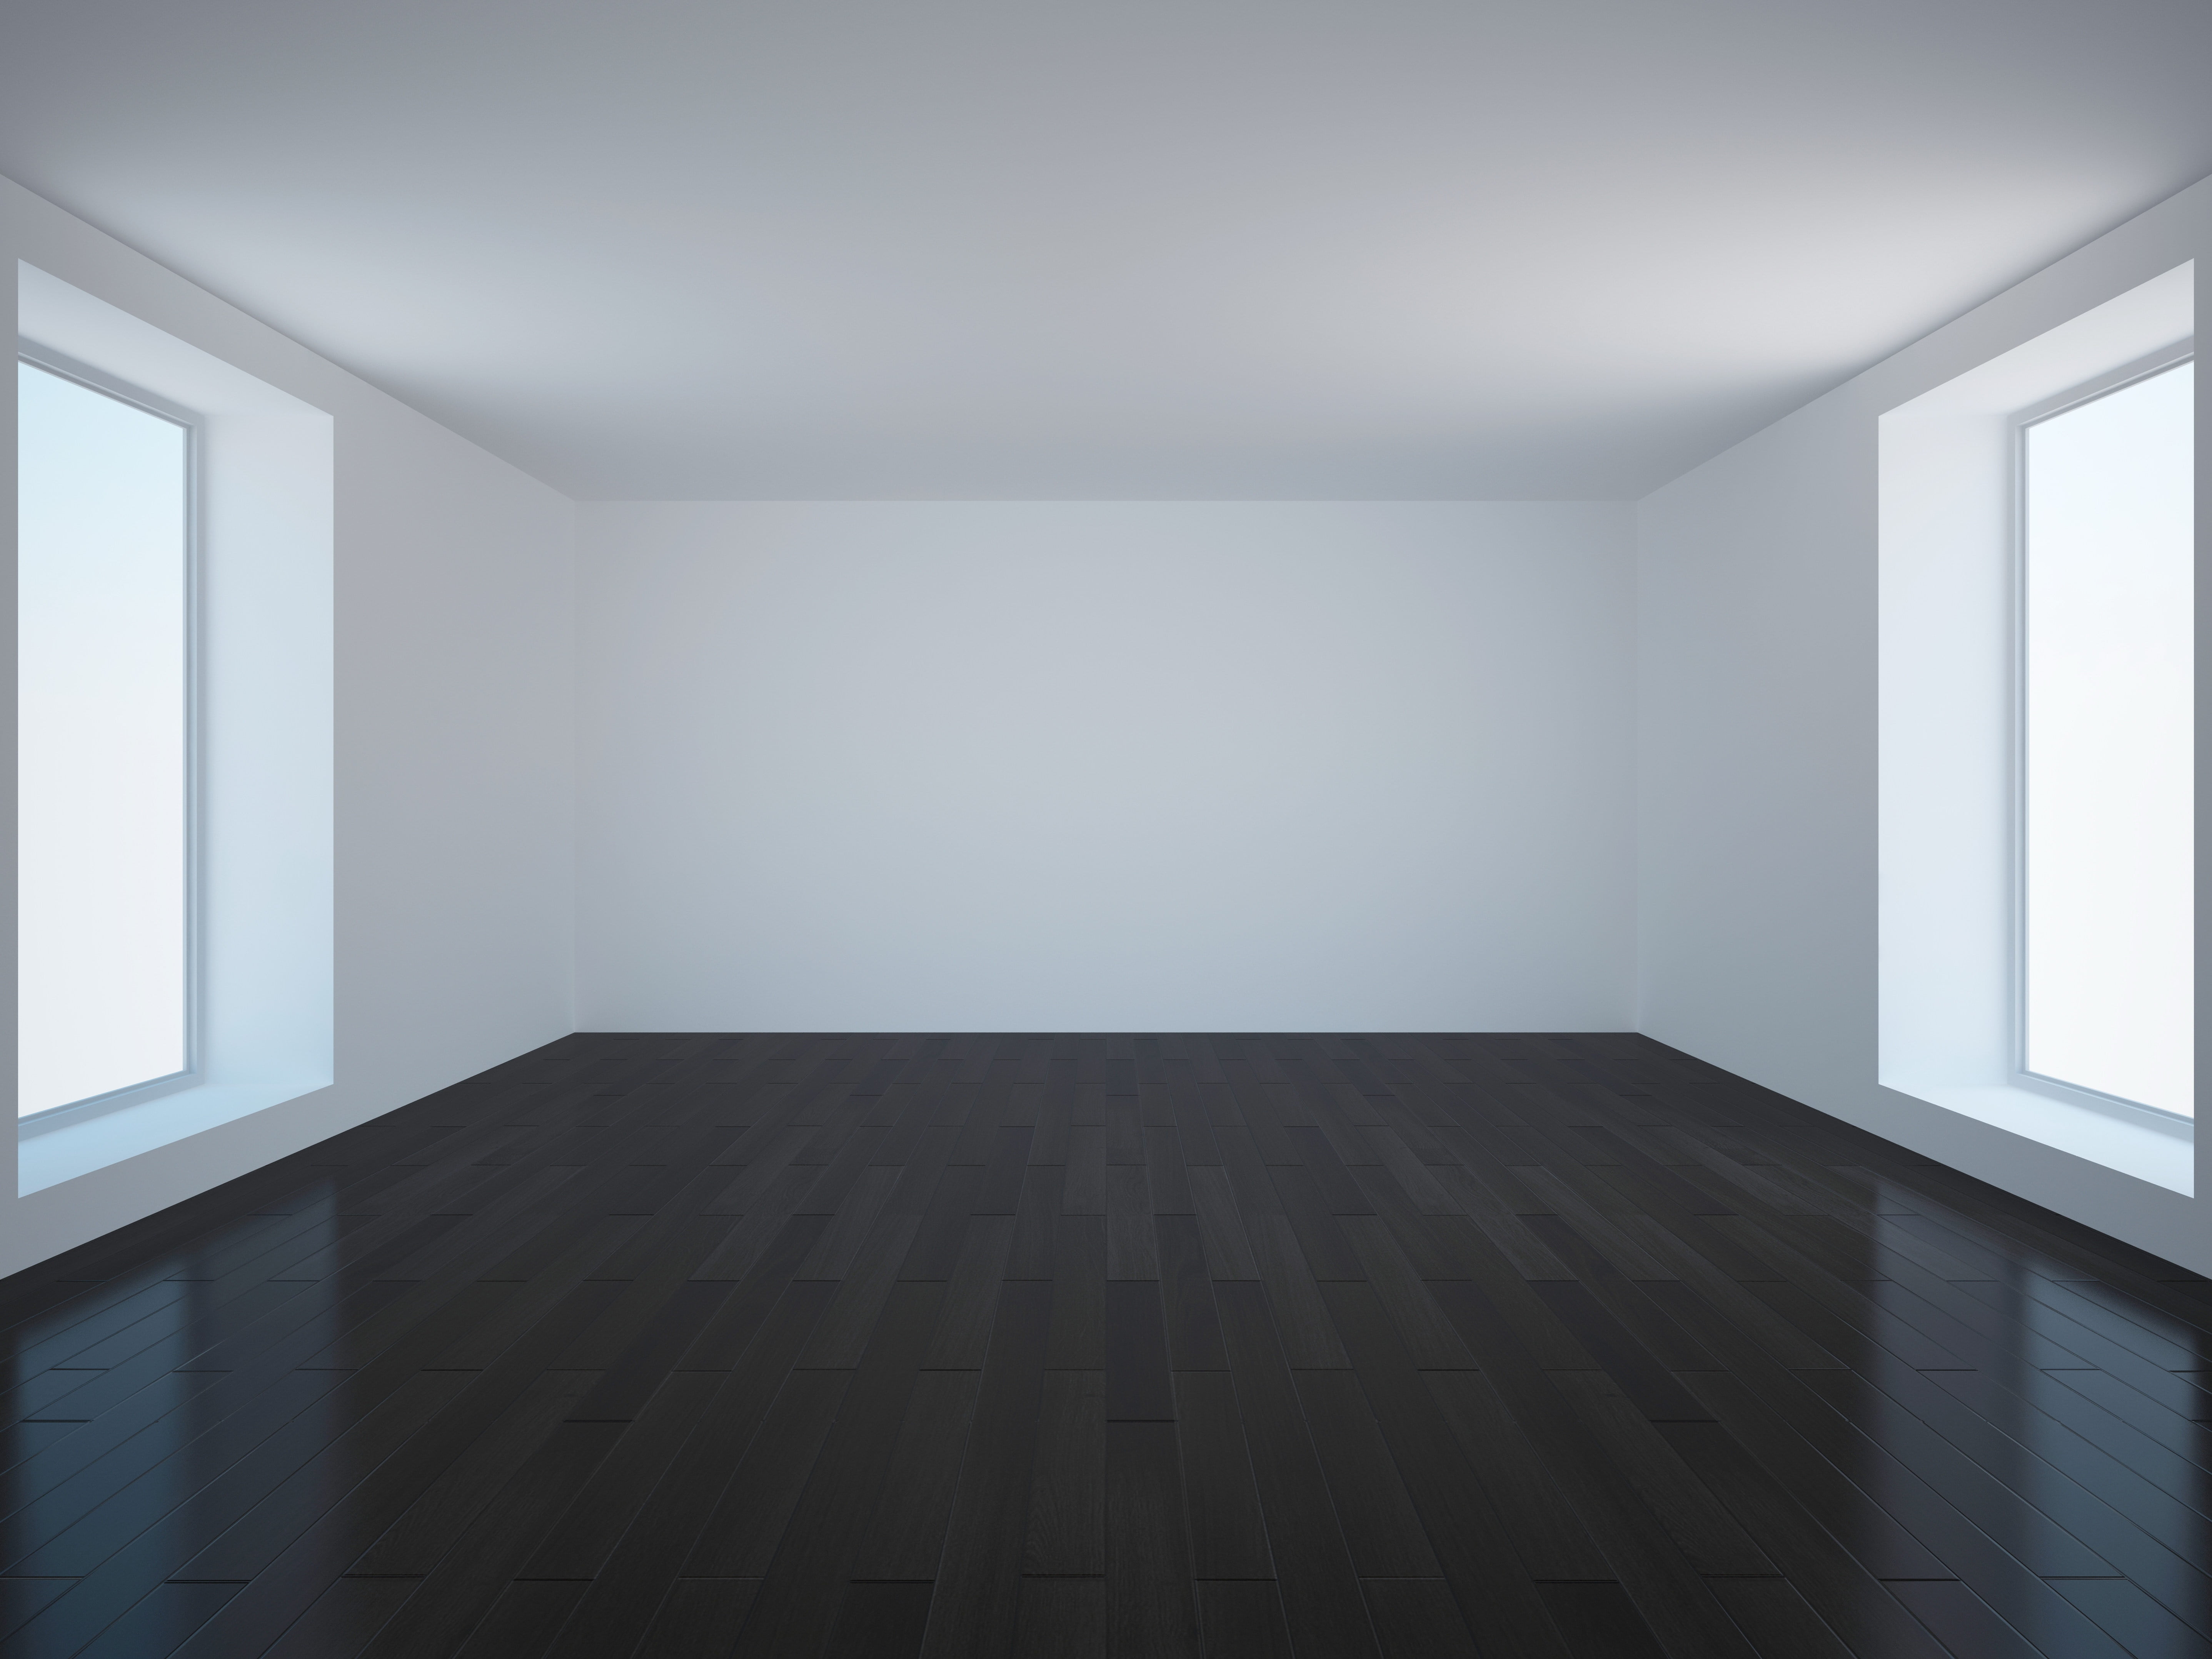 3d Render Illustration Of Room With White Painted Walls Black